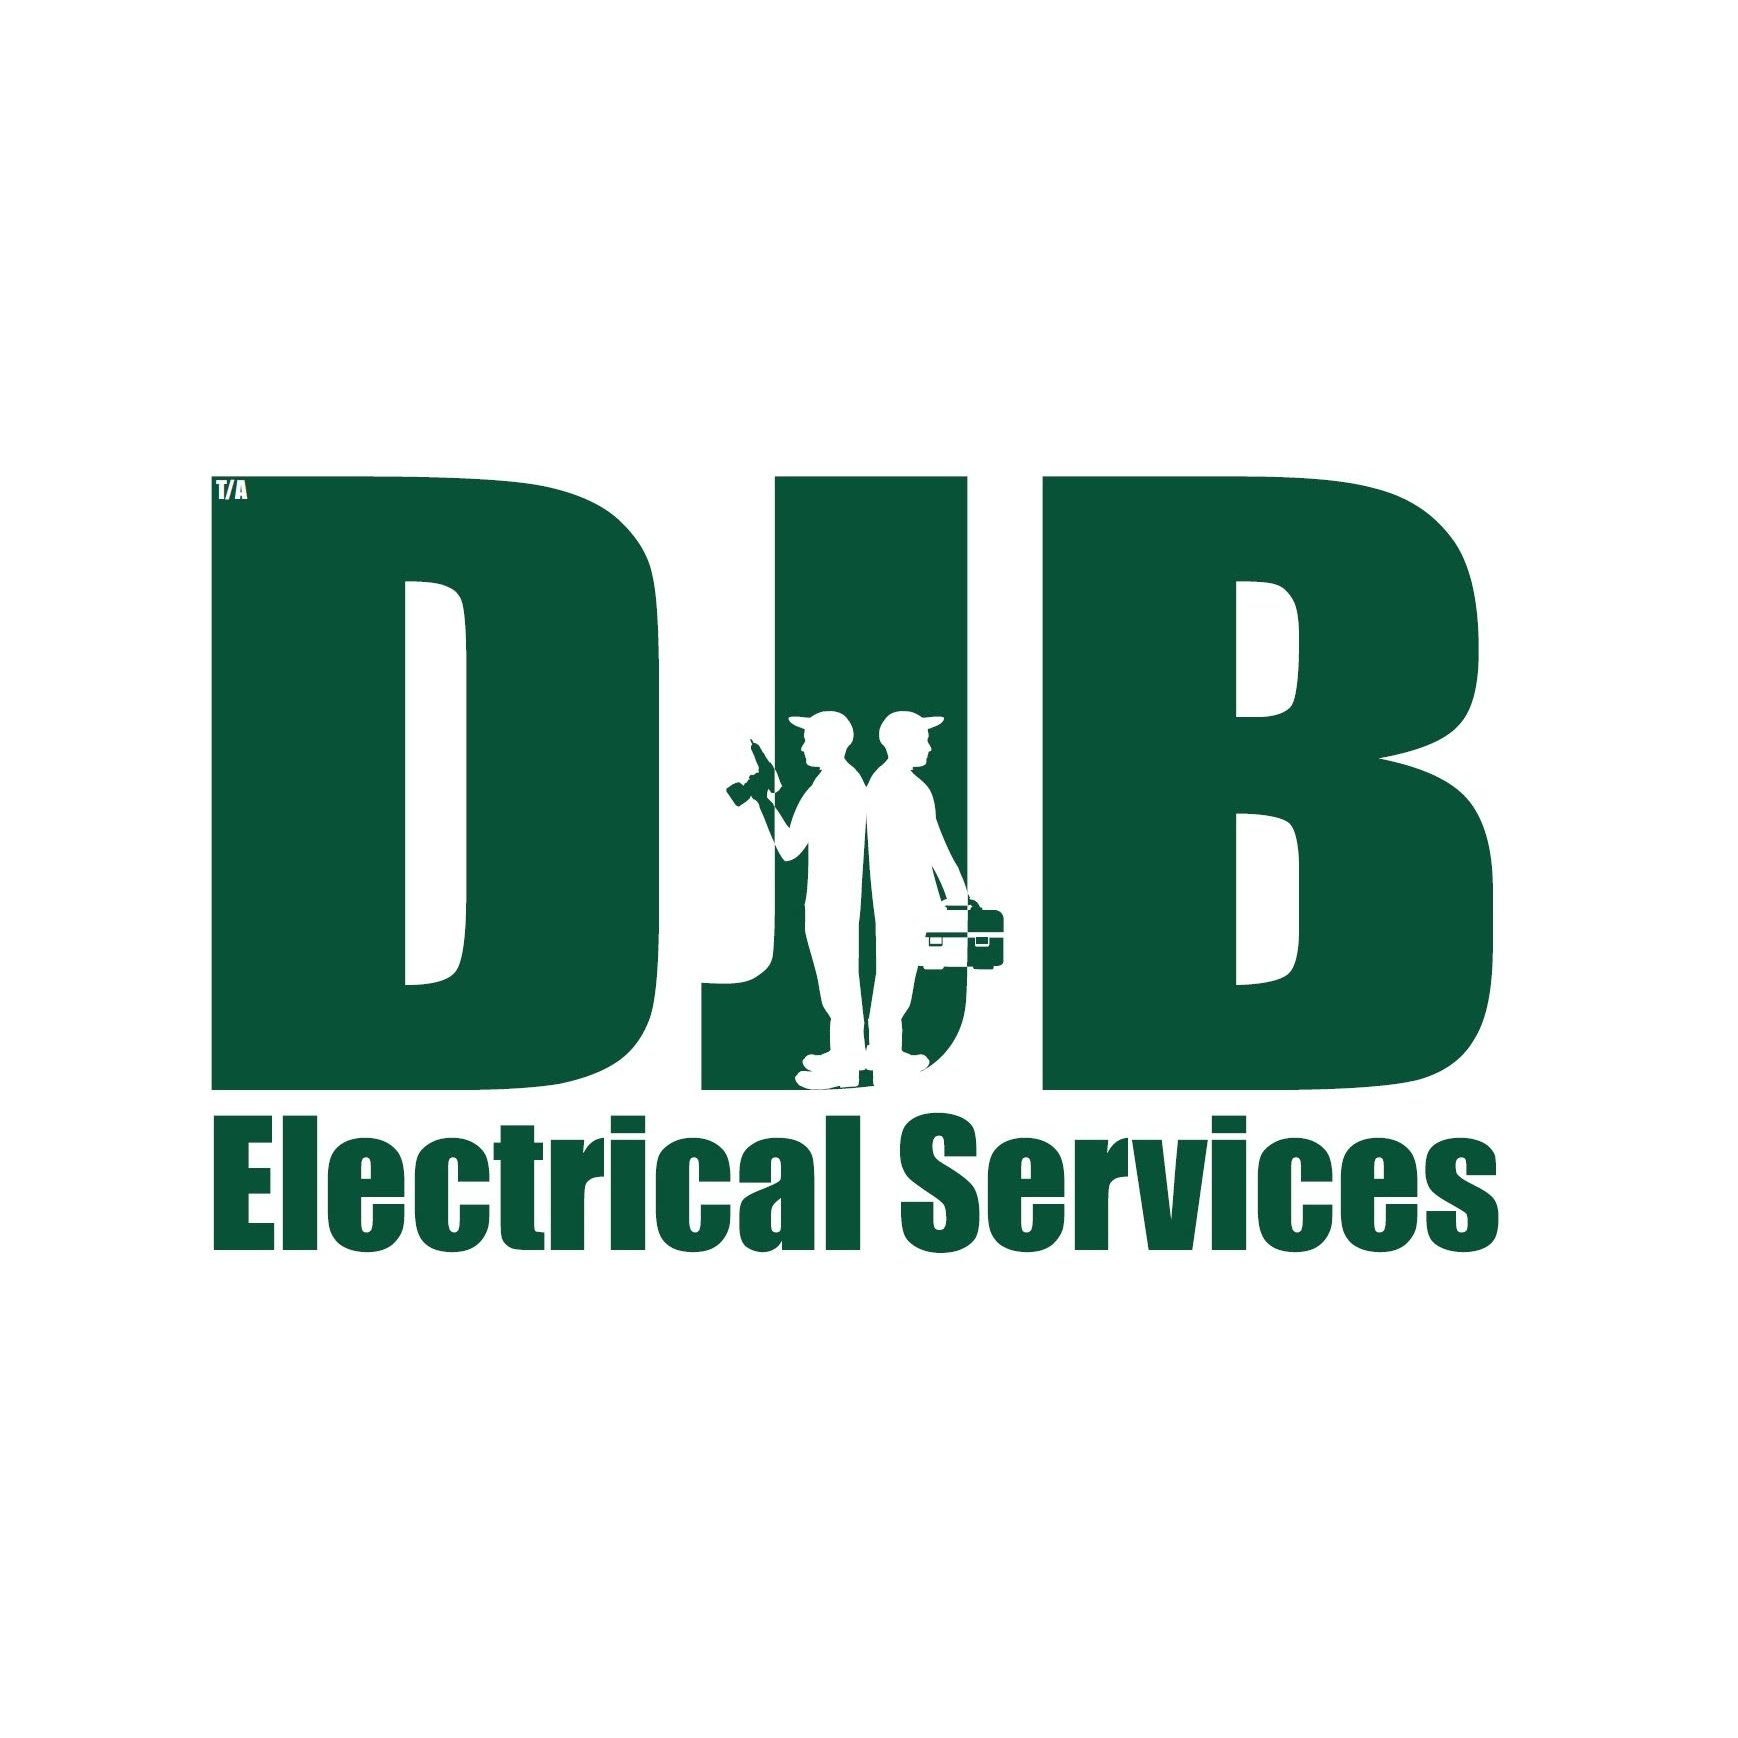 DJB Electrical Services & DJB Air Conditioning Services Logo